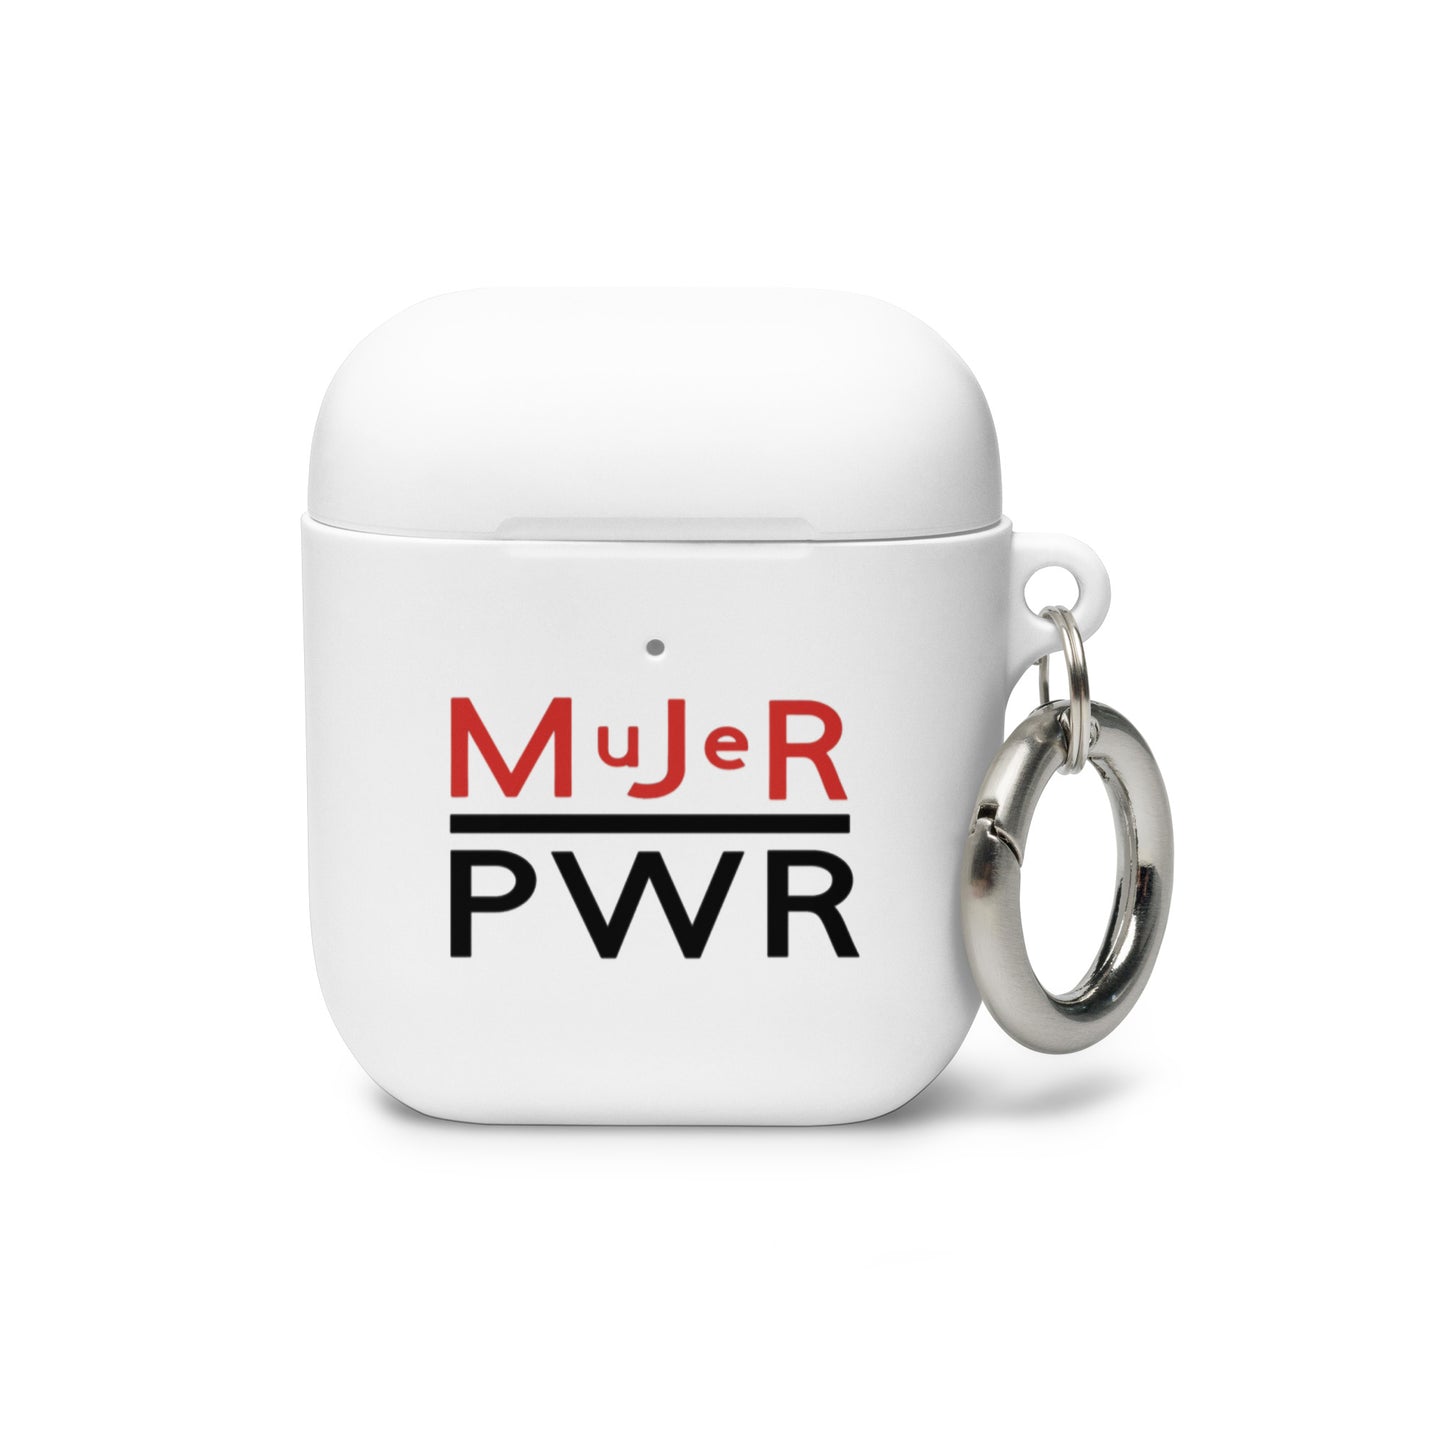 Mujer Power AirPod Case